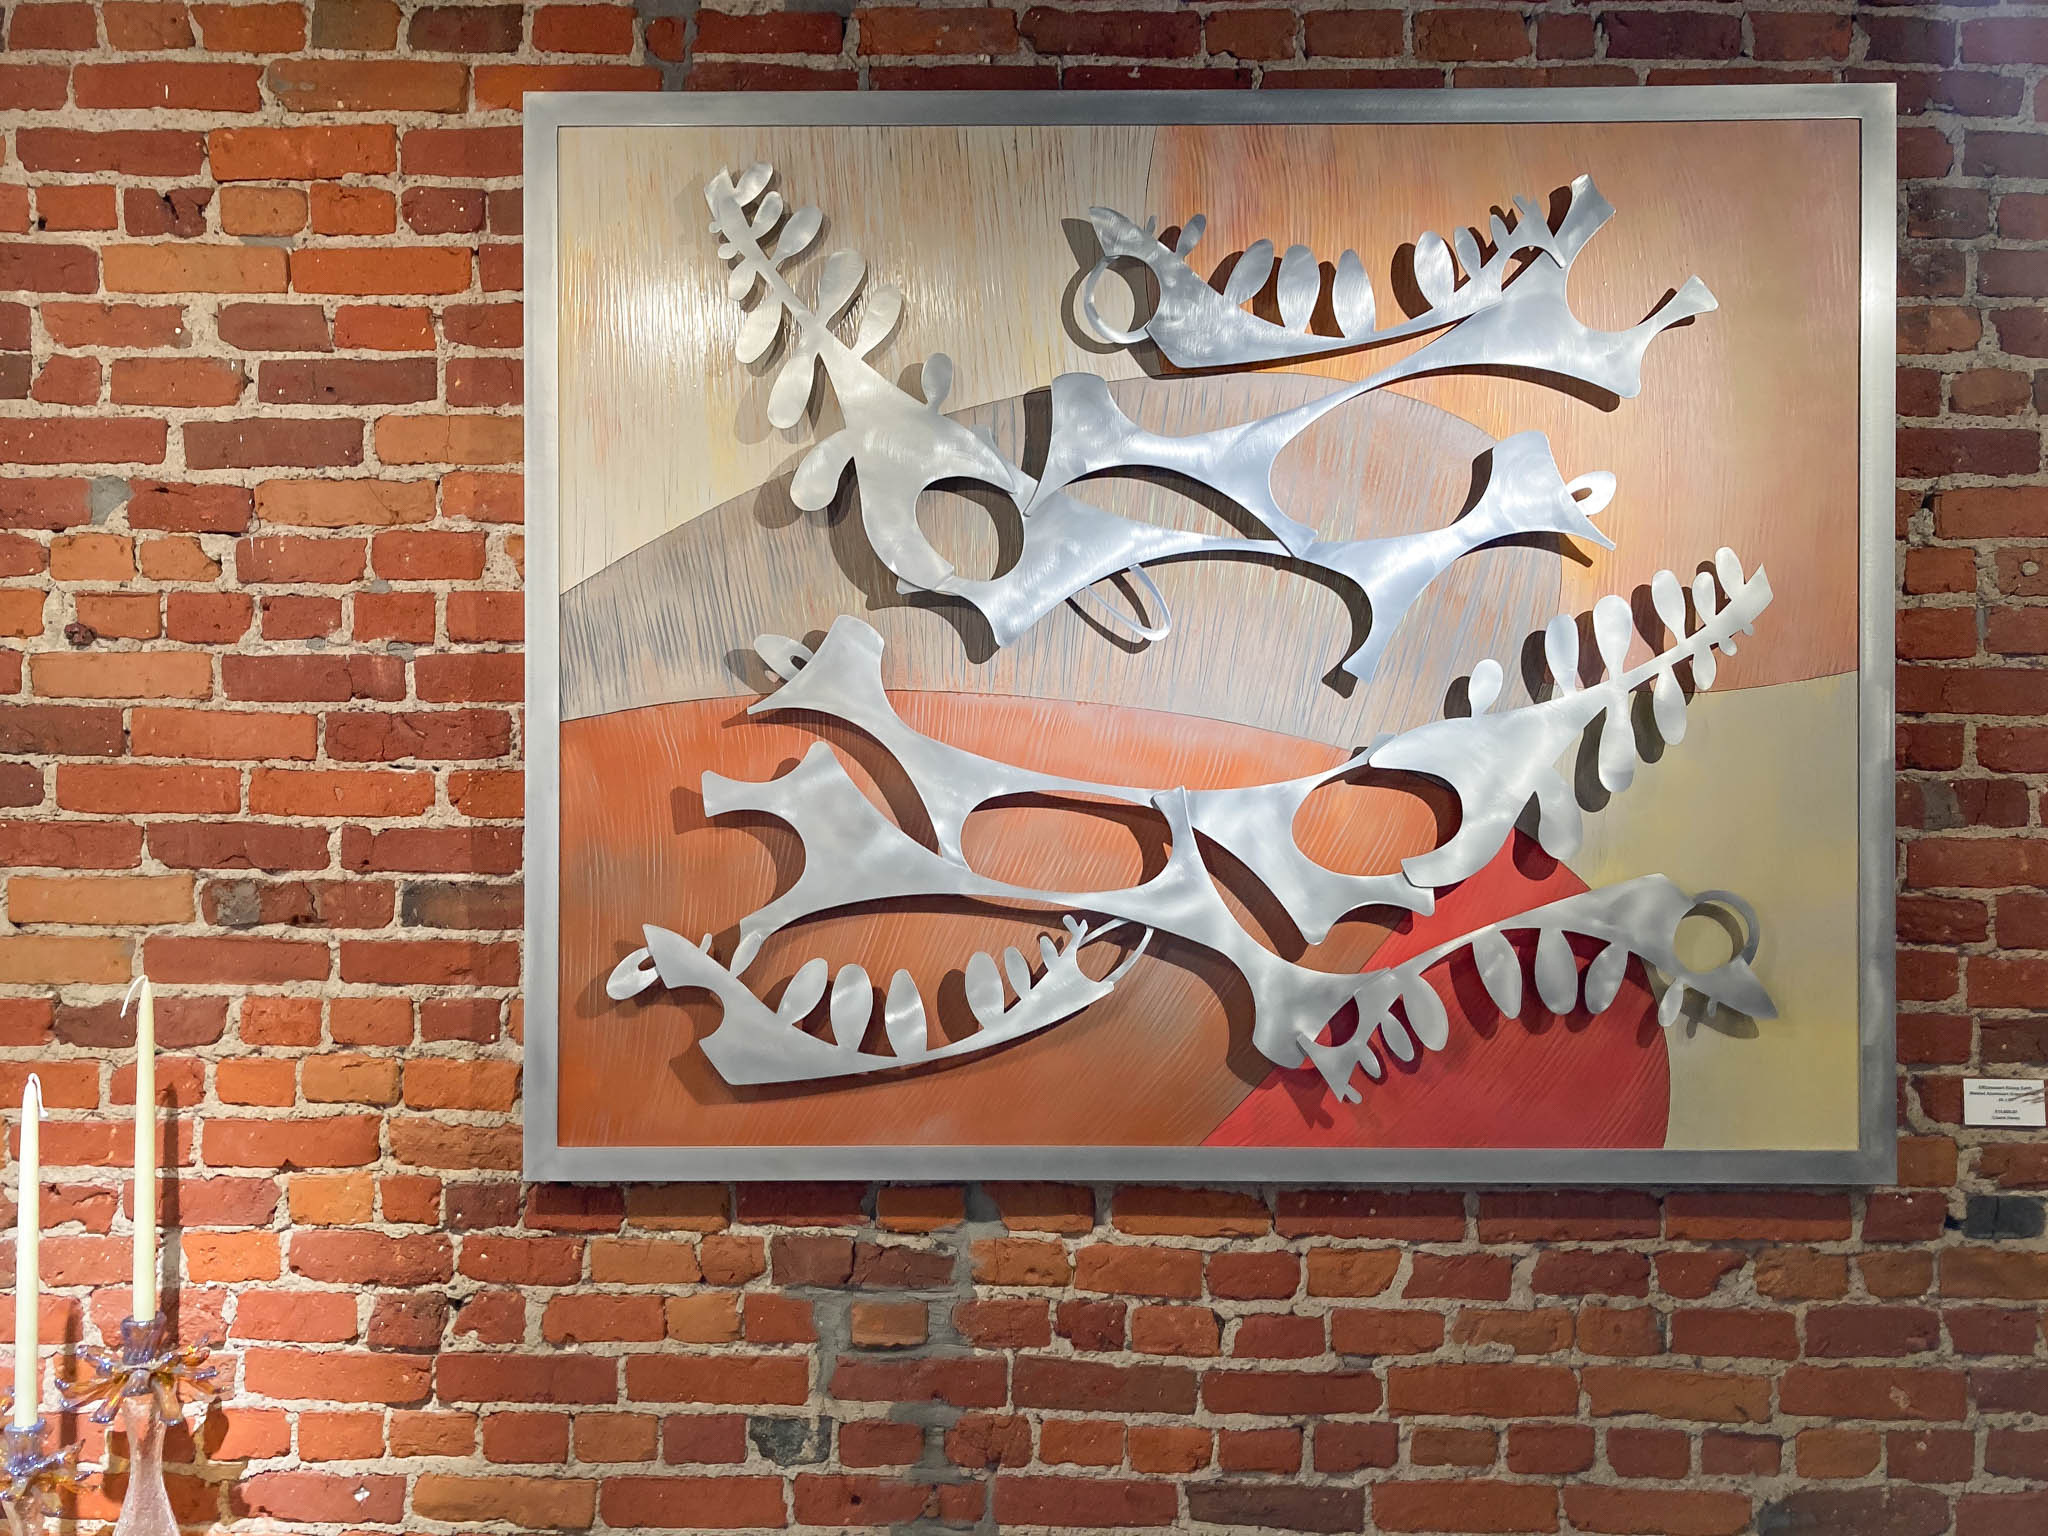 Abstract shapes evoking compound leaves, delicate curves, and woody colors make up this large wall sculpture hanging prominently in the gallery.